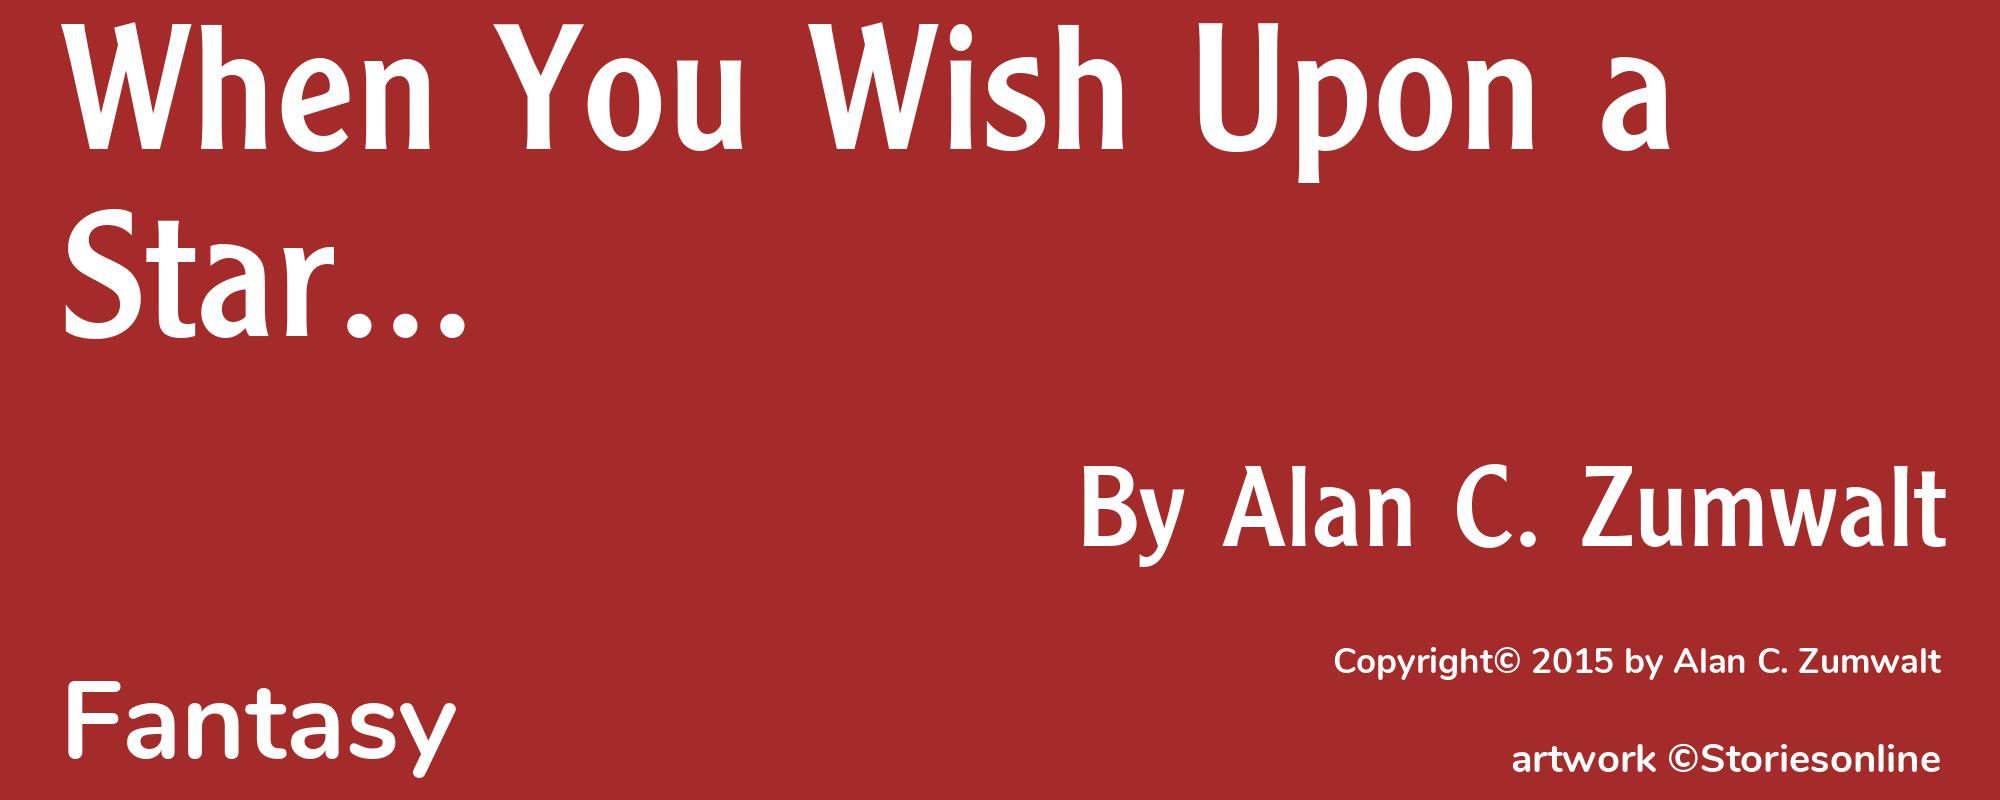 When You Wish Upon a Star... - Cover